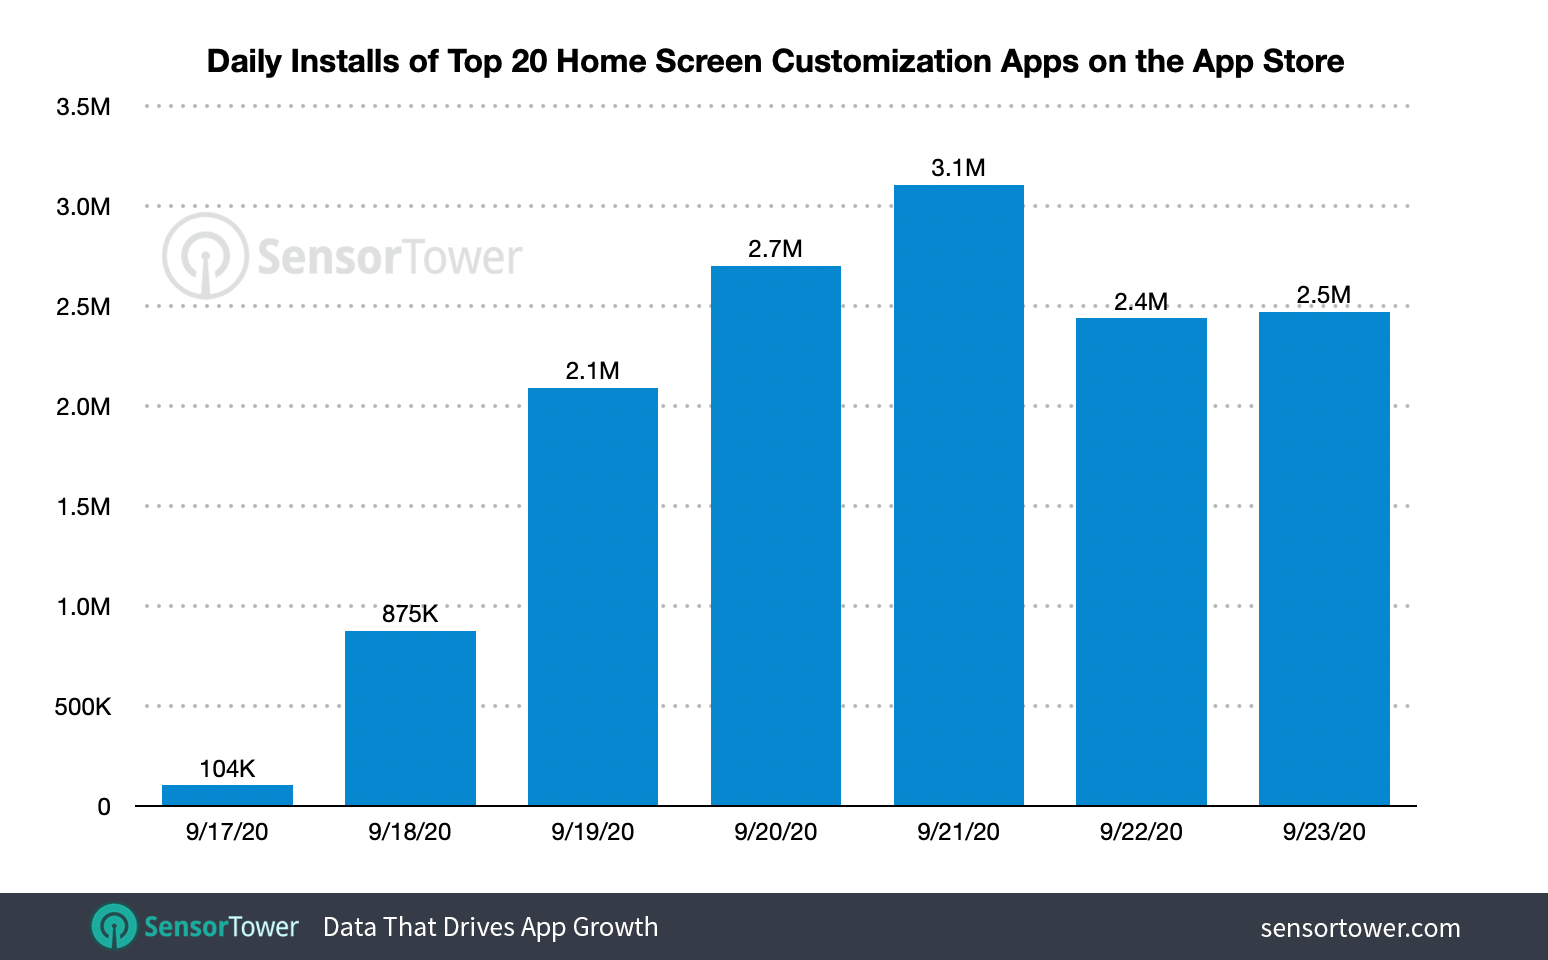 The top 20 home screen customization apps saw their installs collectively peak on September 20